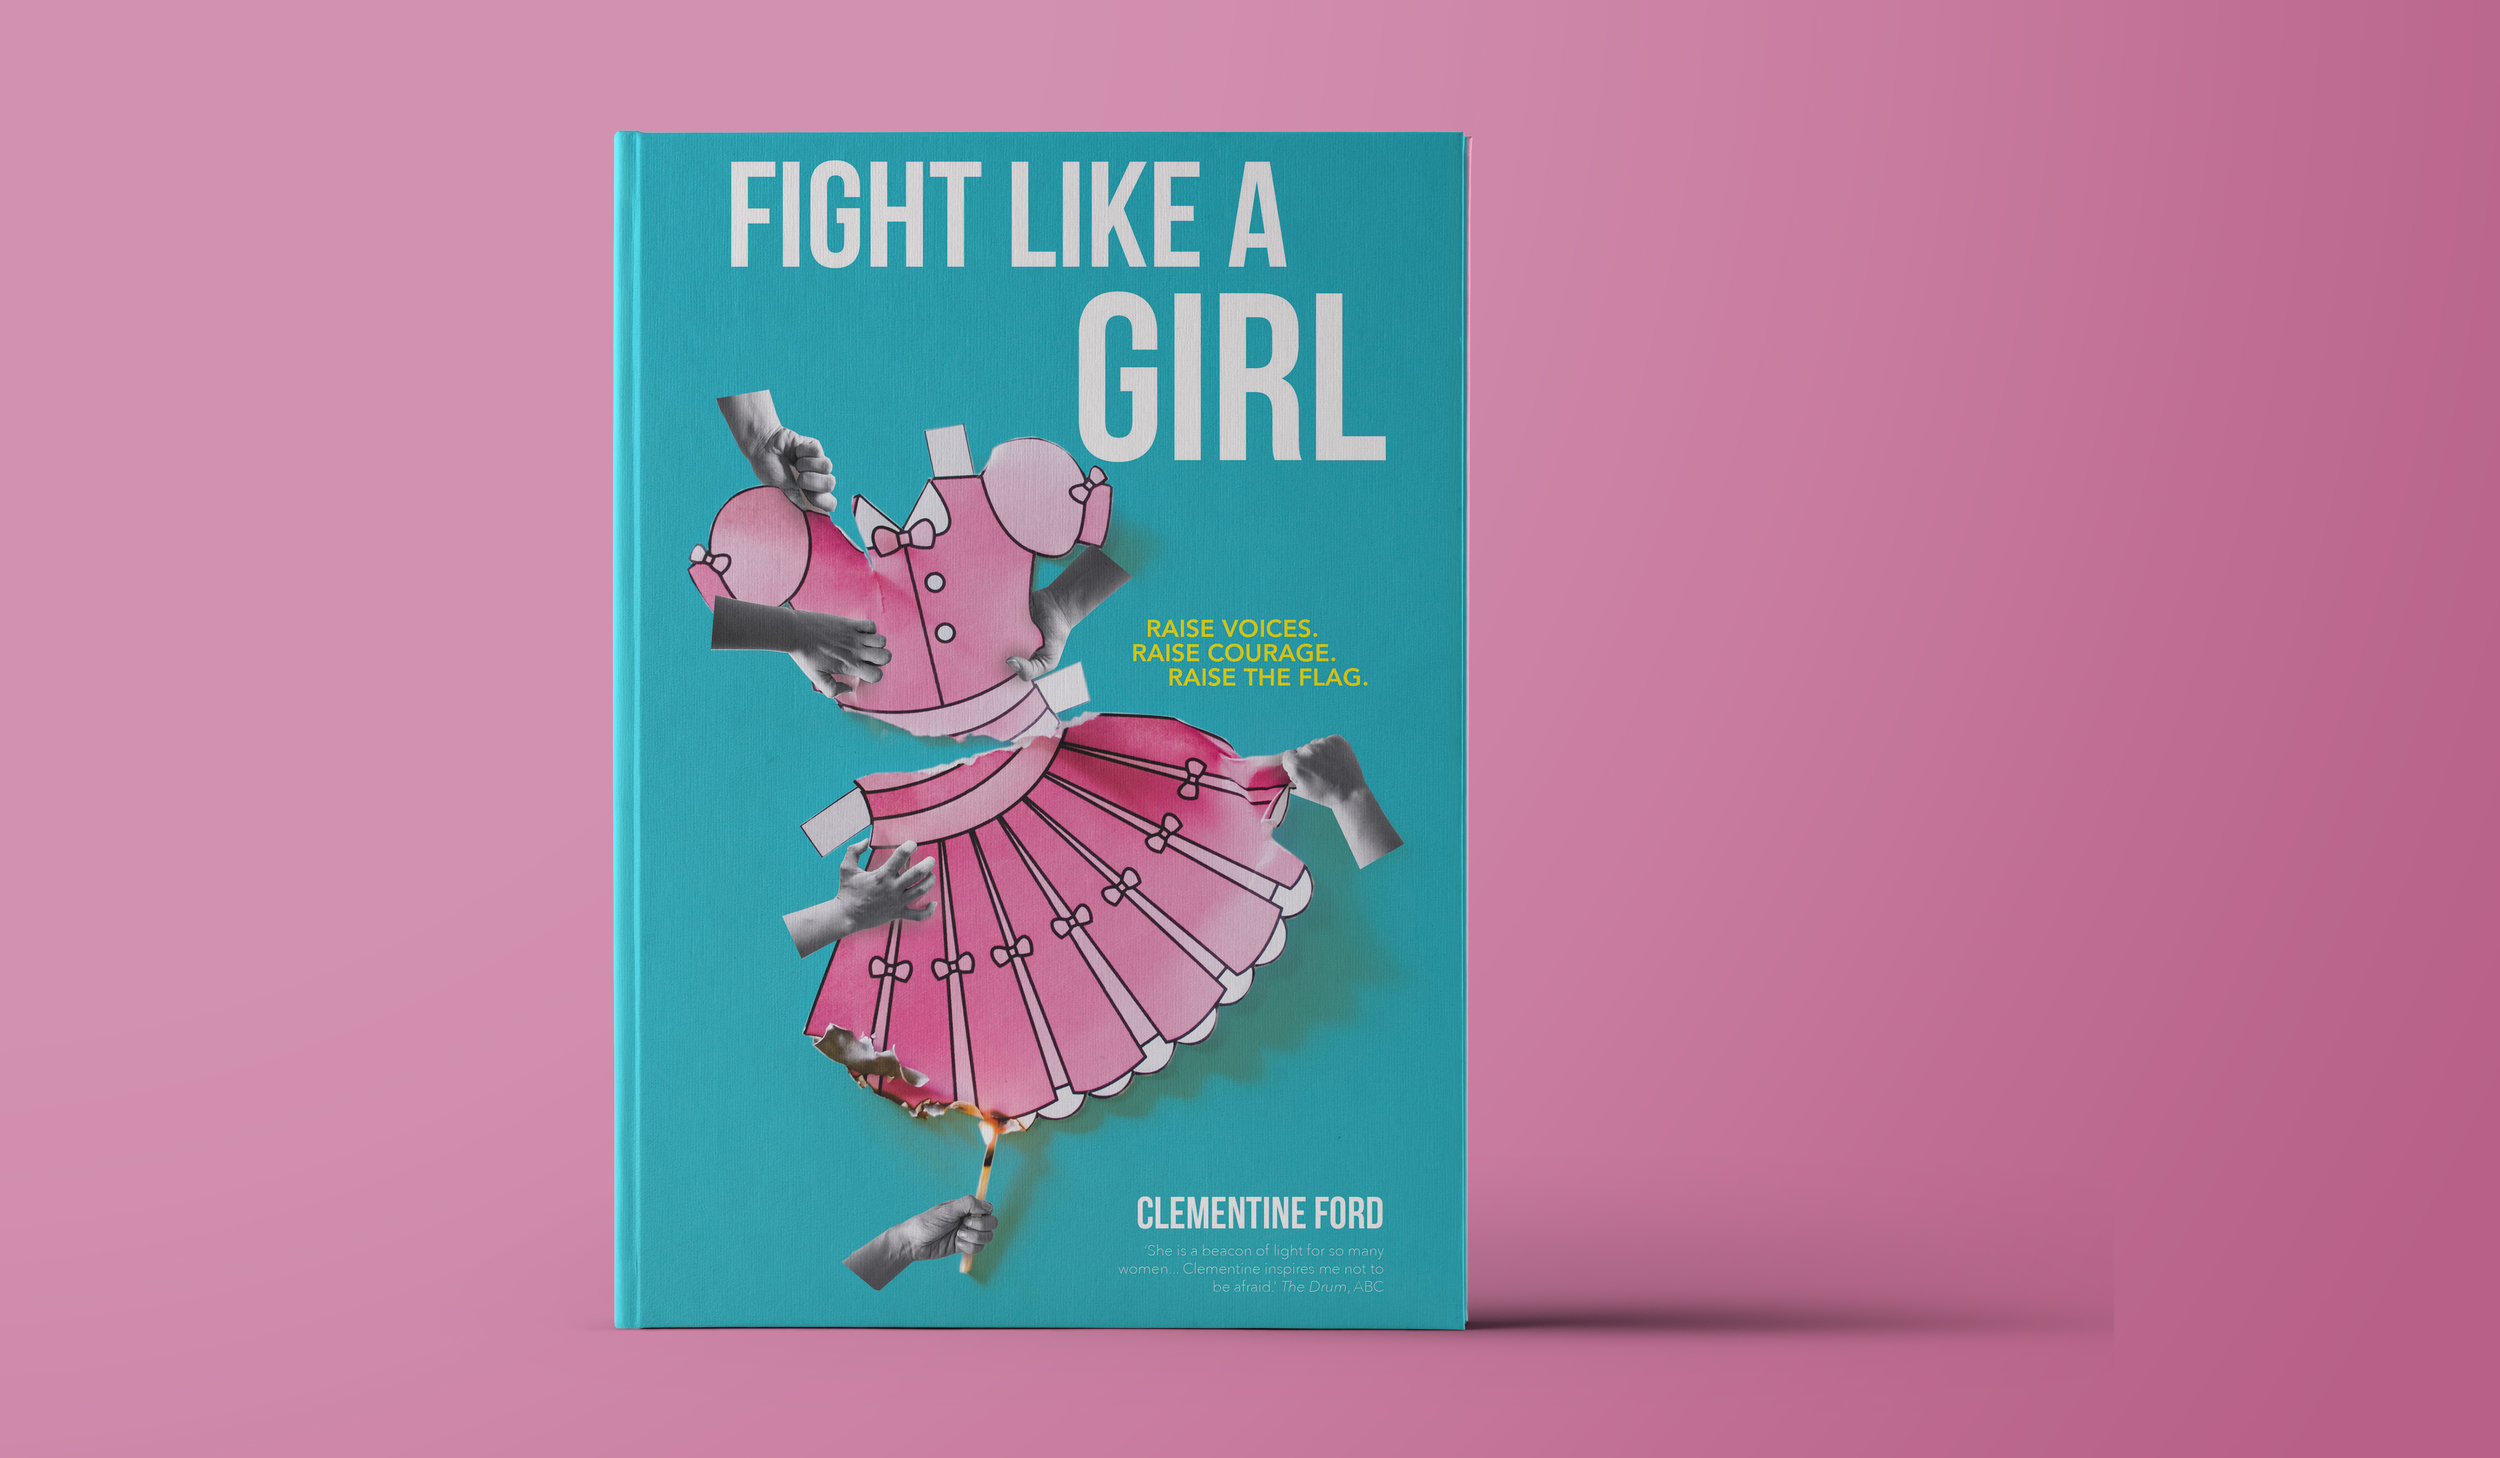 Book cover design - fight like a girl